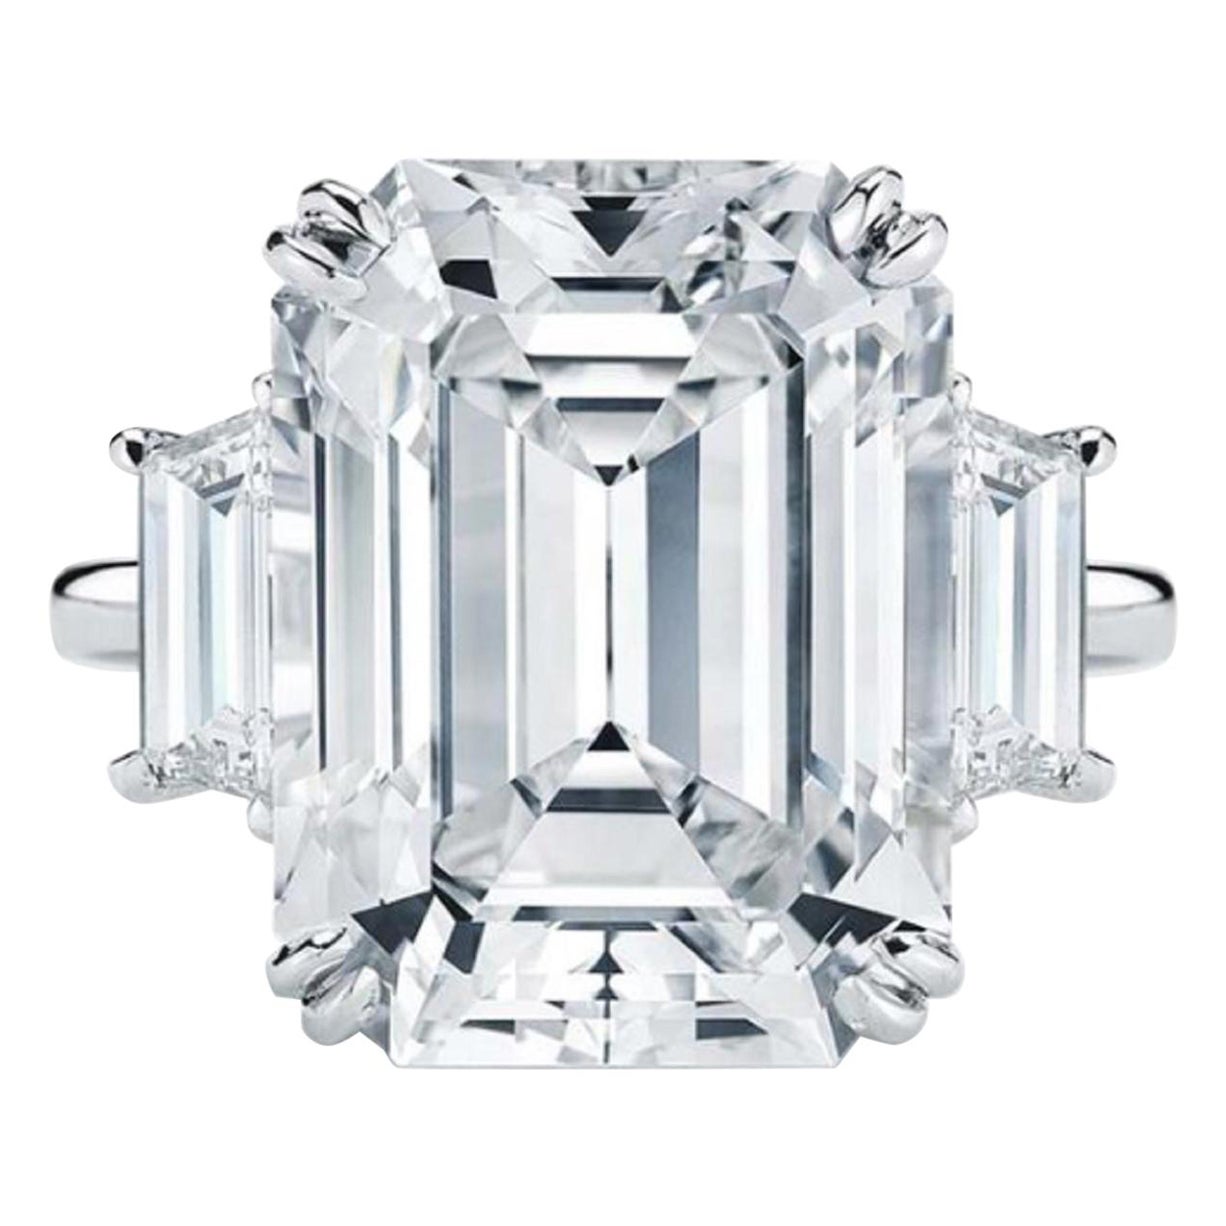 An exquisite solitaire diamond ring featuring a GIA-certified VS1 clarity G color diamond, boasting a strikingly large appearance with a ratio of 14.88mm. The diamond exhibits a captivating G color grade, indicating near colorlessness, and a VS1